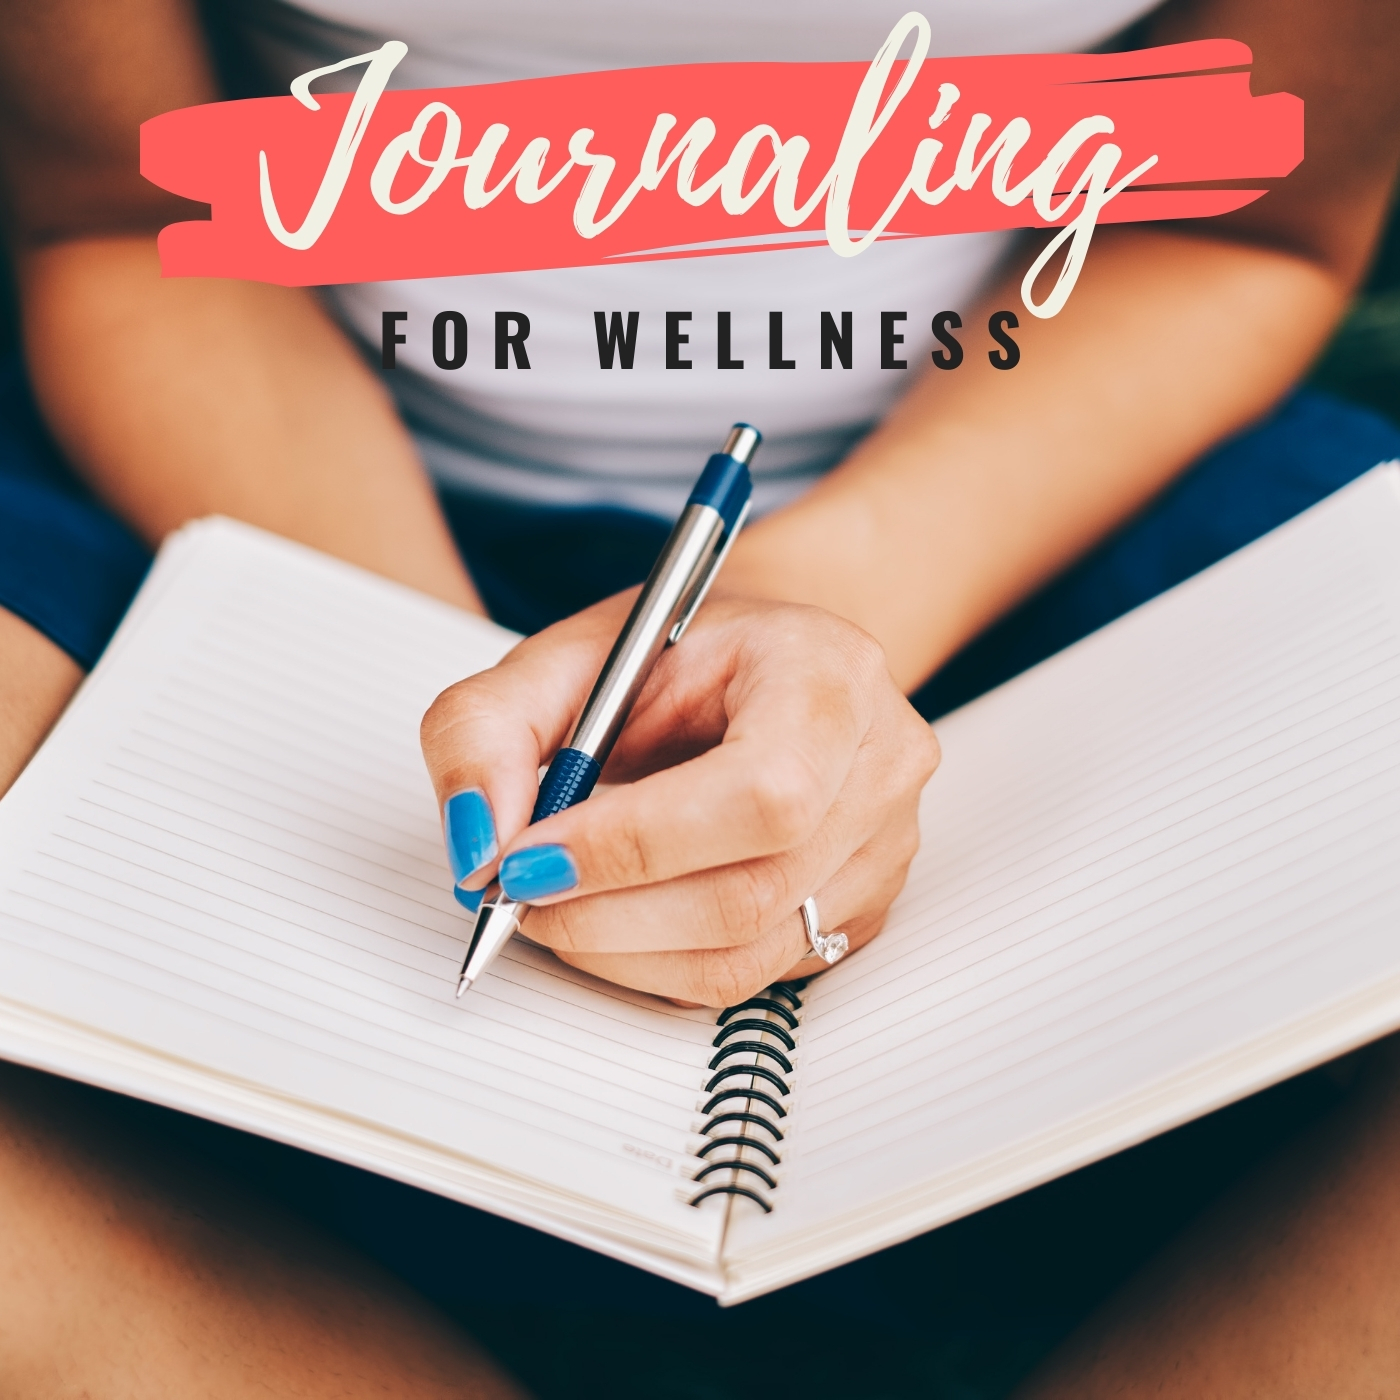 Find Out the Power of Journaling - You May Be Surprised!